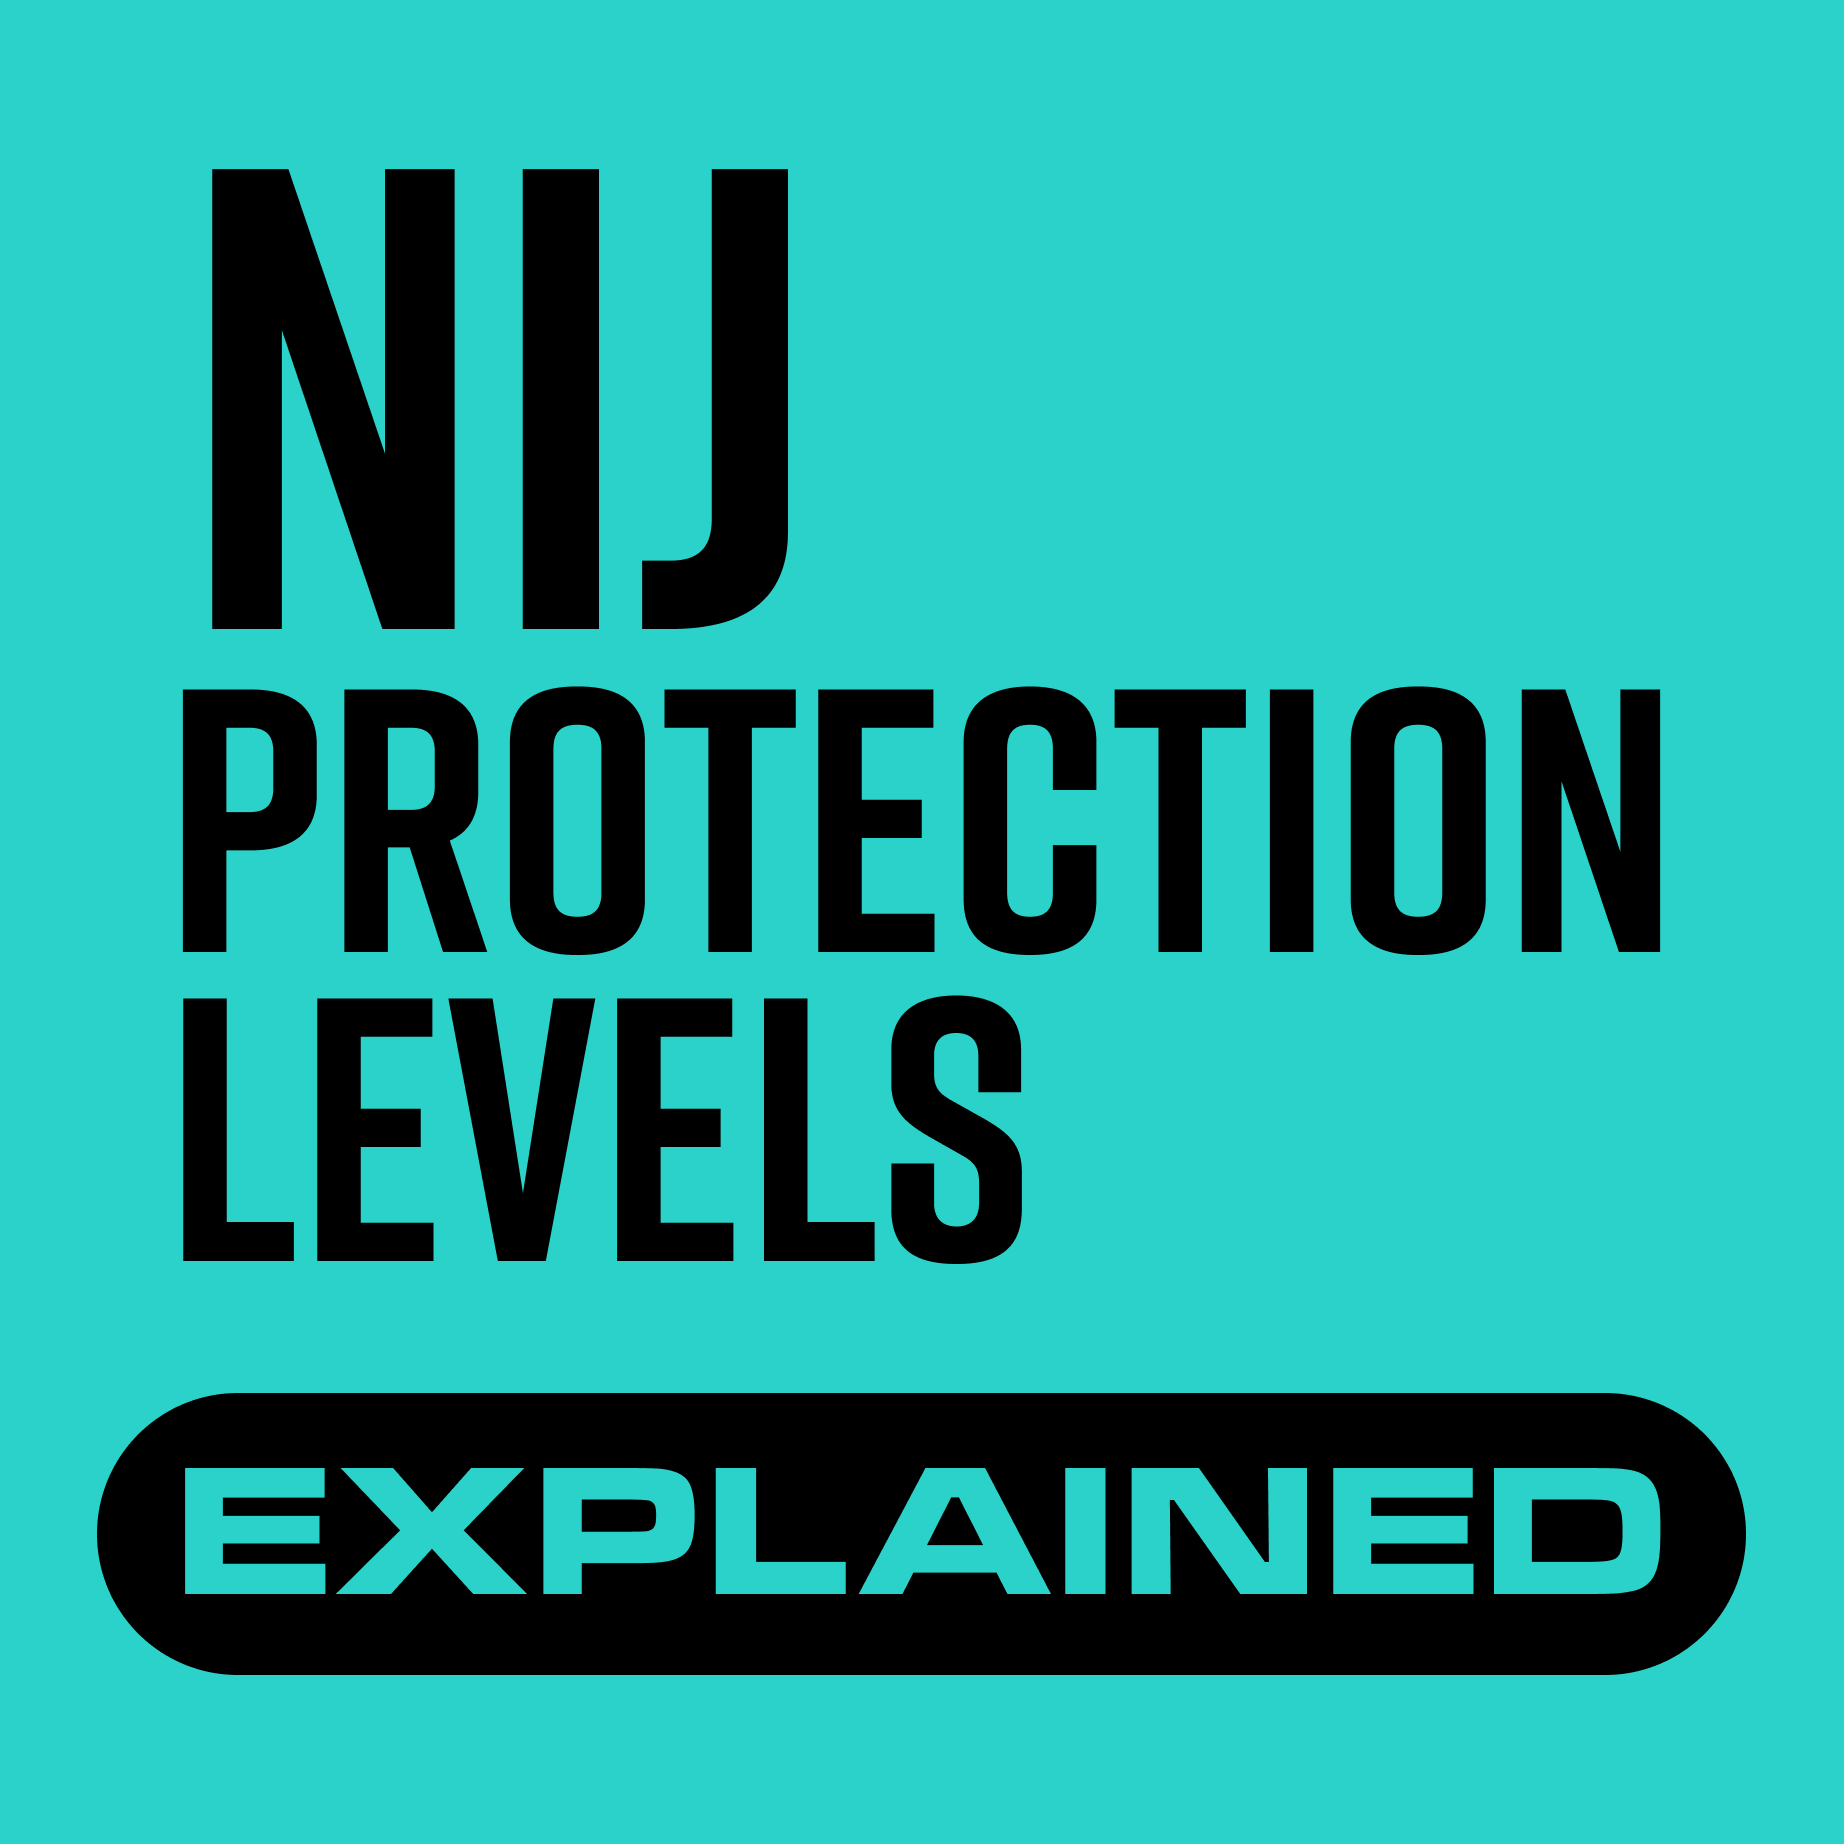 What are the different NIJ Protection Levels?